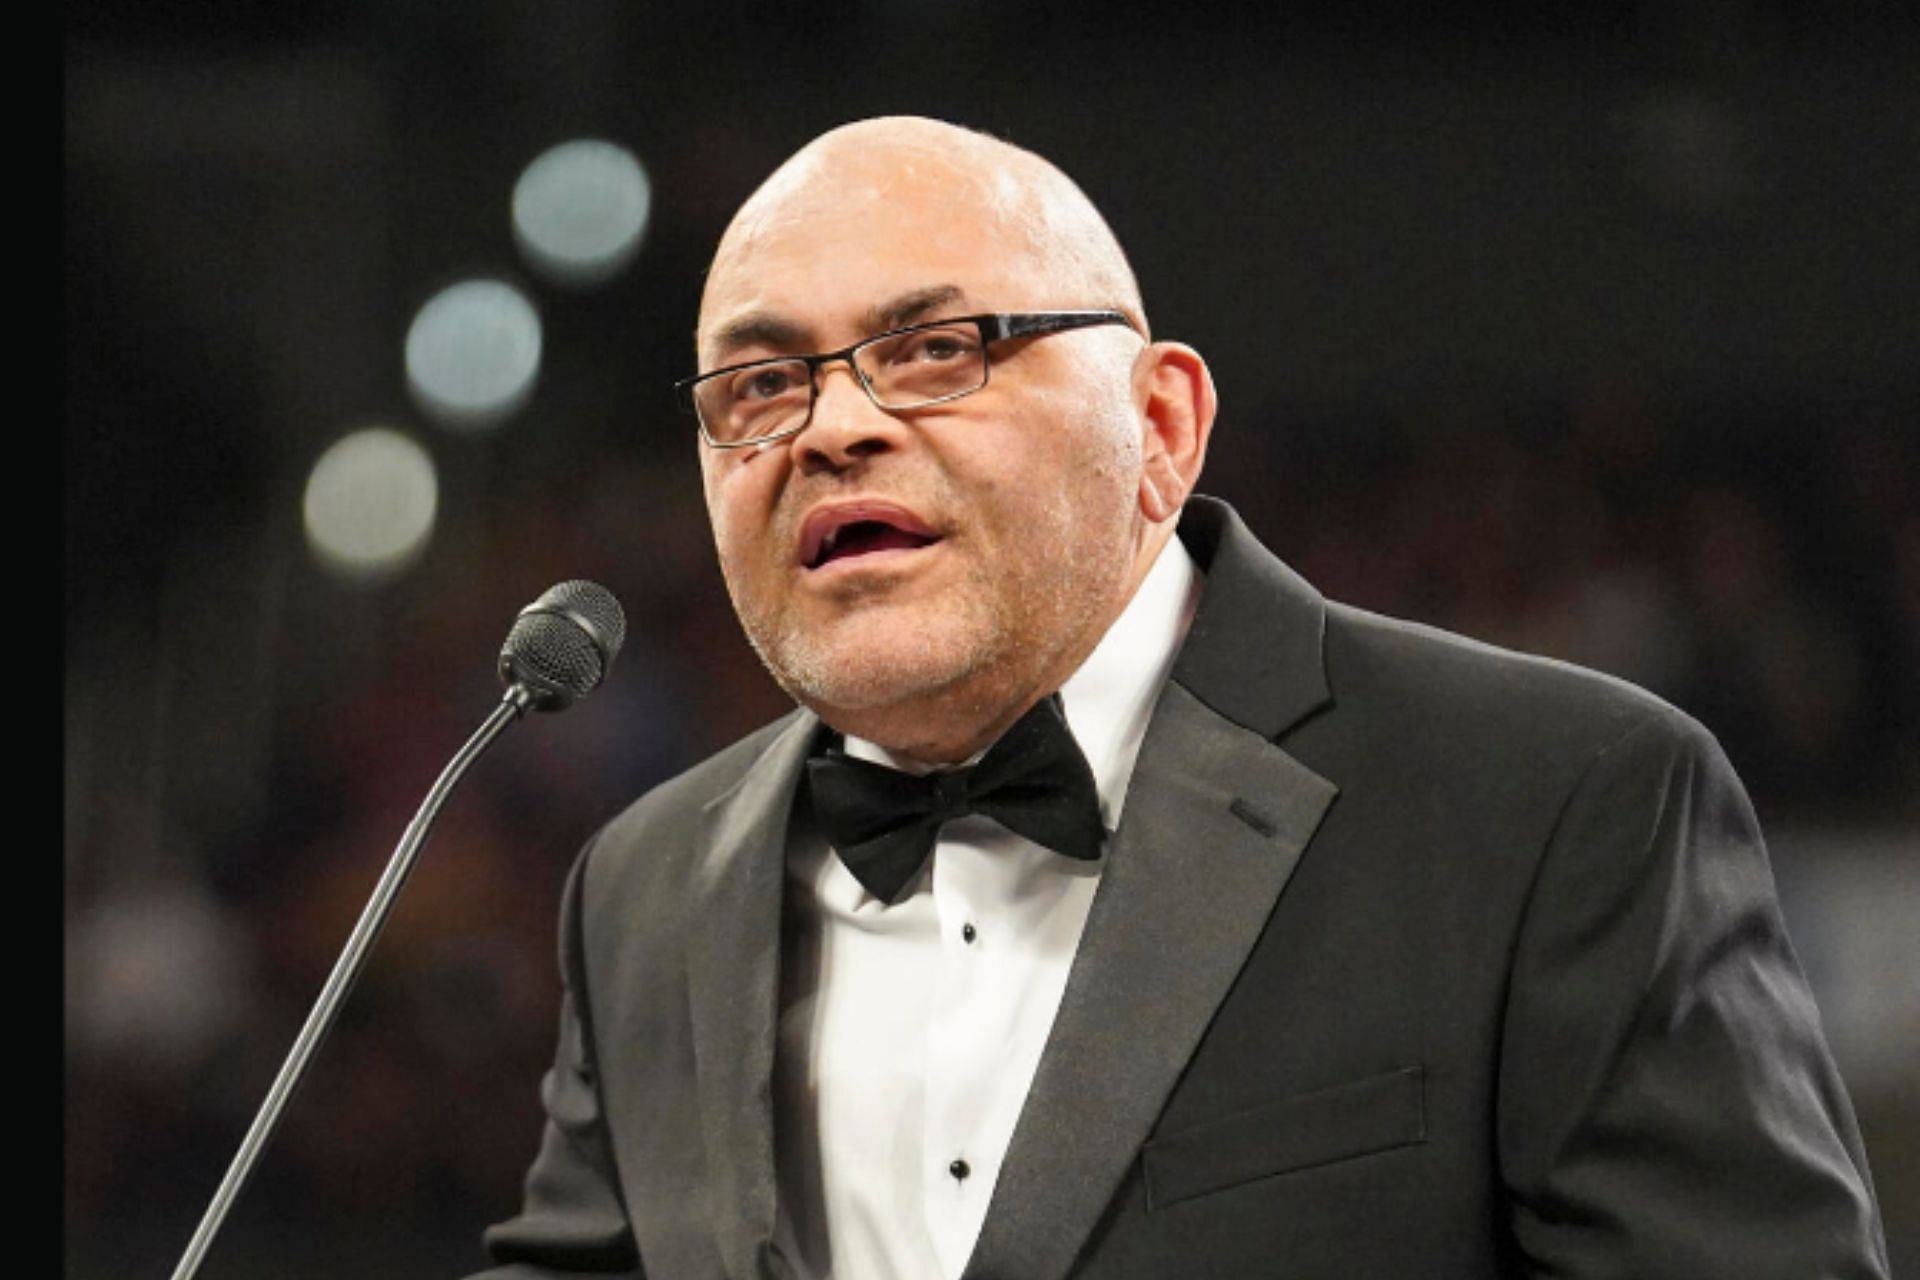 Konnan has his opinion about a current AEW wrestler